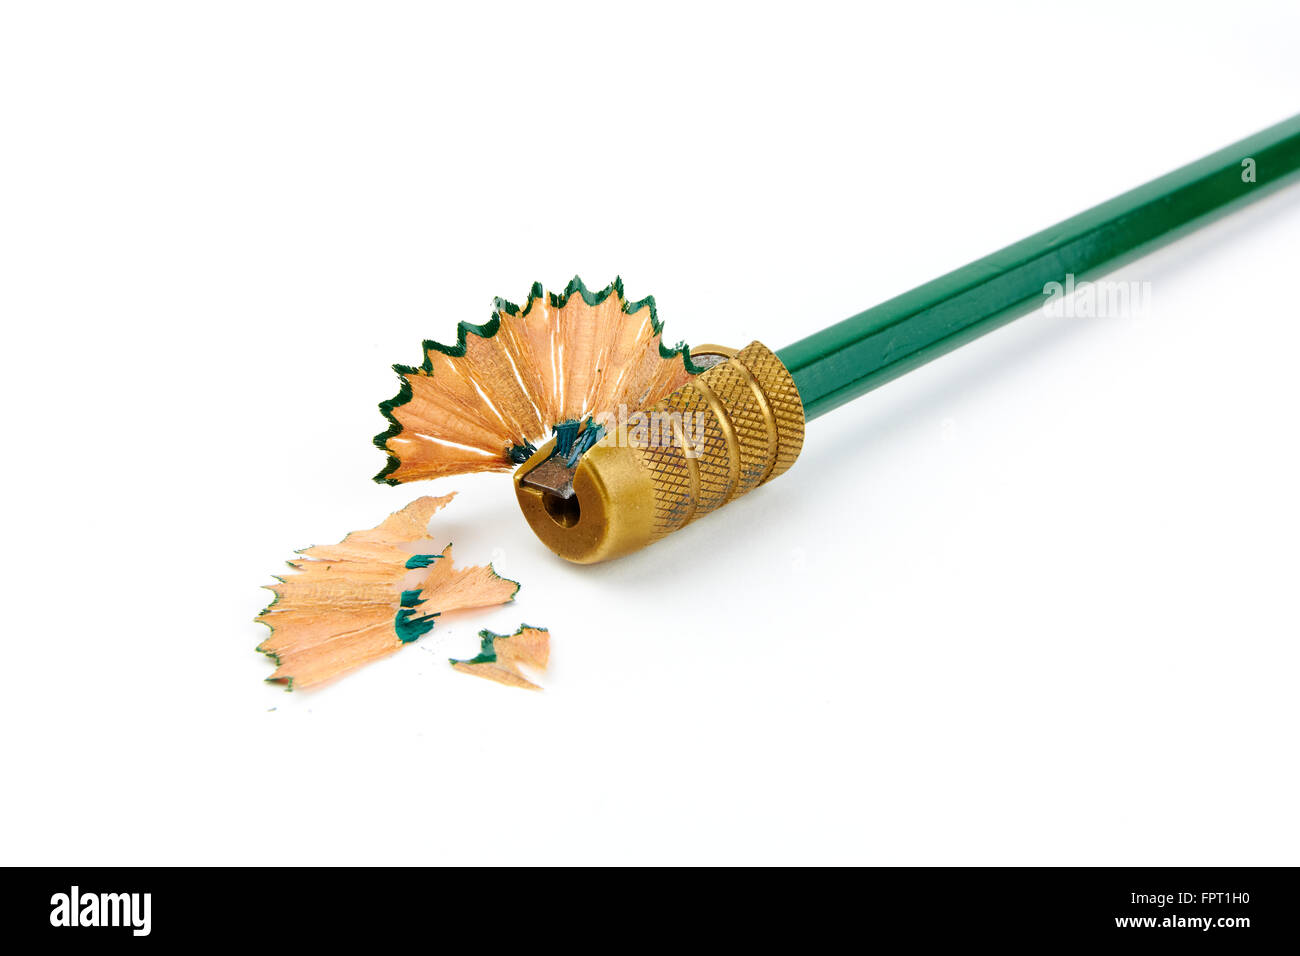 Green pencil in a brass pencil sharpener with shaving hanging out, all on white background Stock Photo